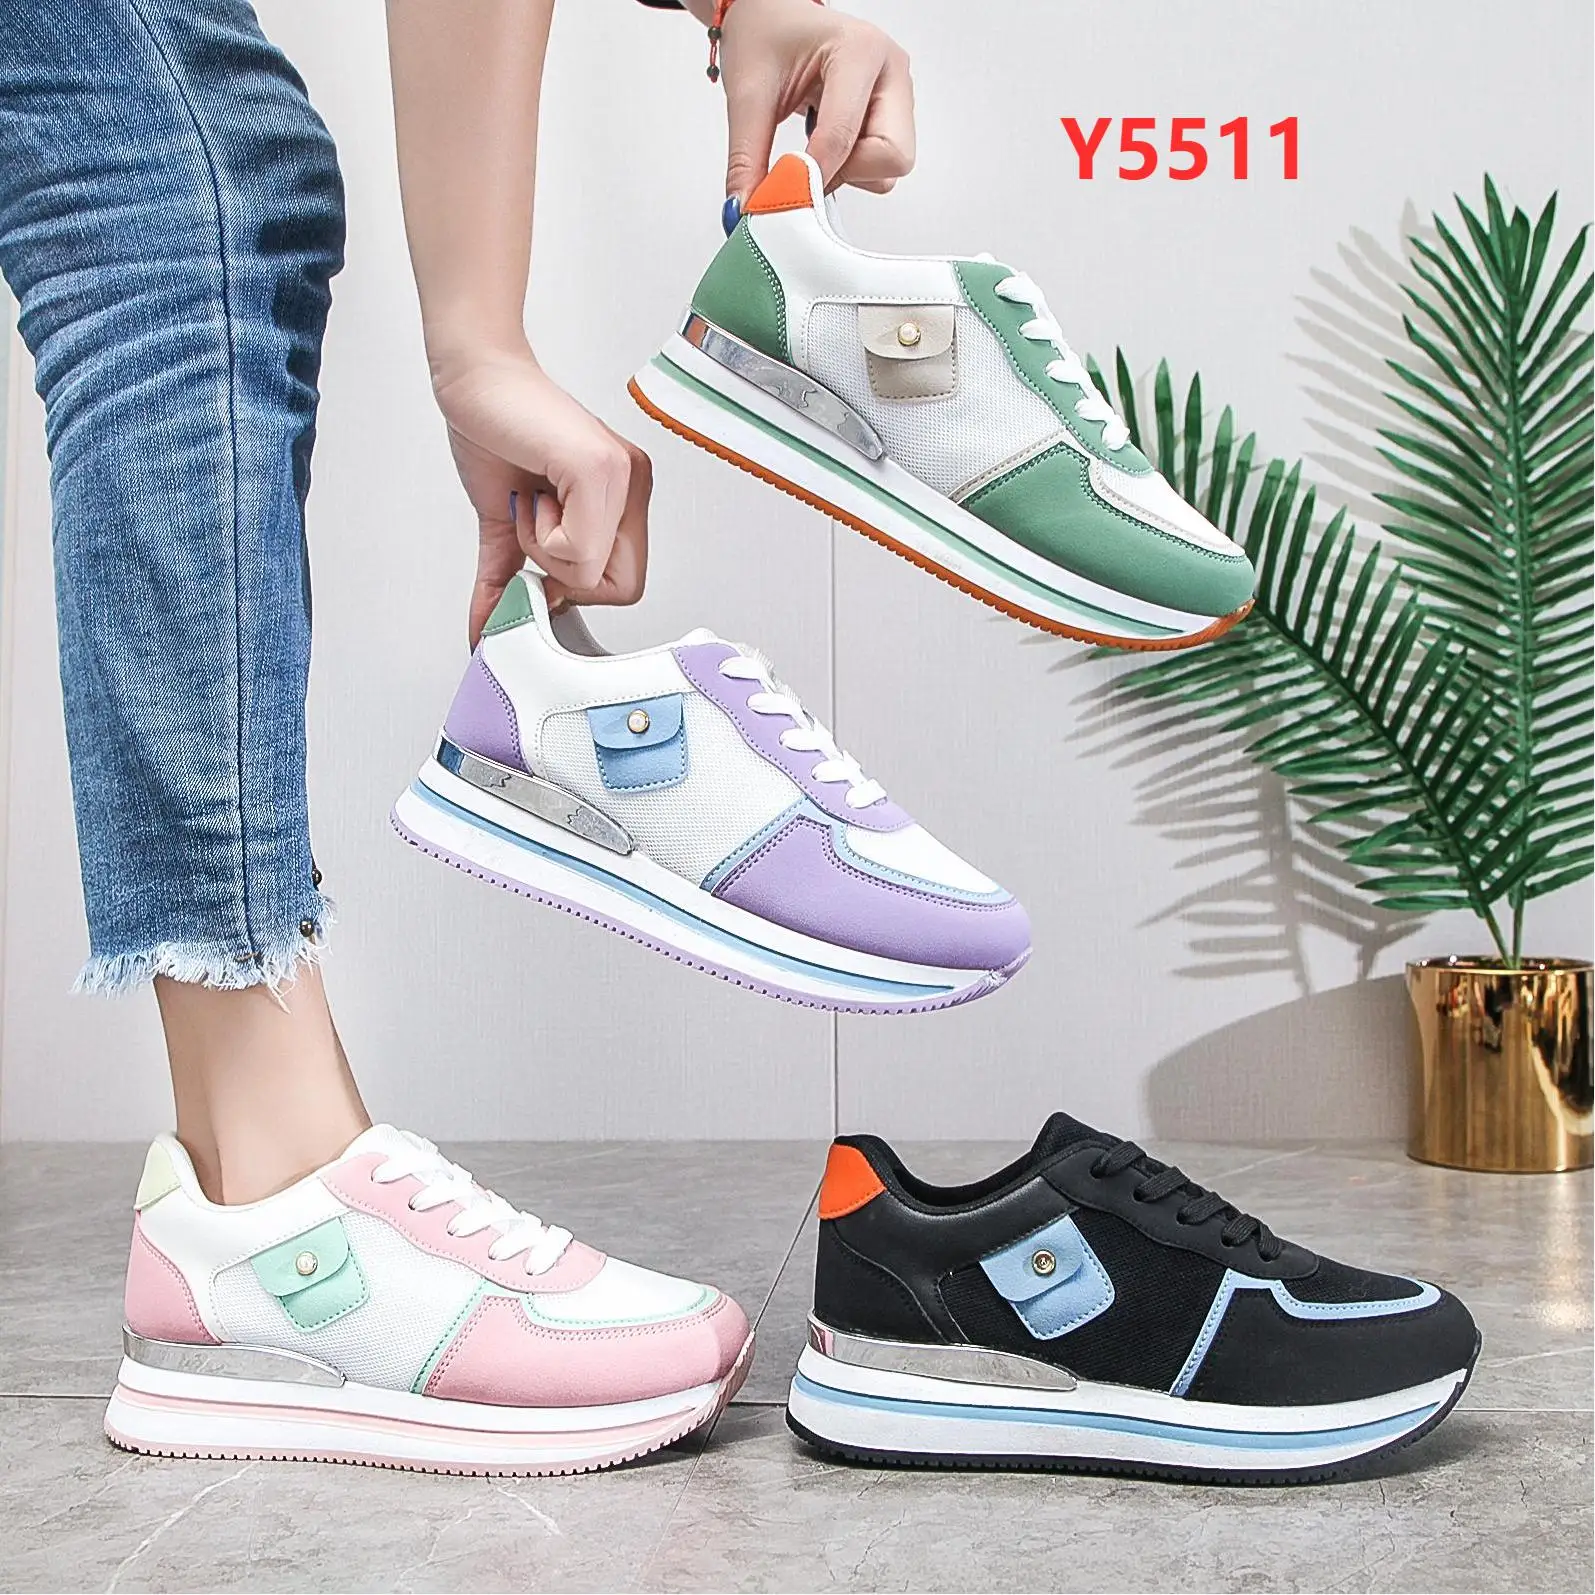 2022 walking shoes Sport Shoes Running Sneakers New Arrivals Girls Lace Up Suede Fashion Casual shoes